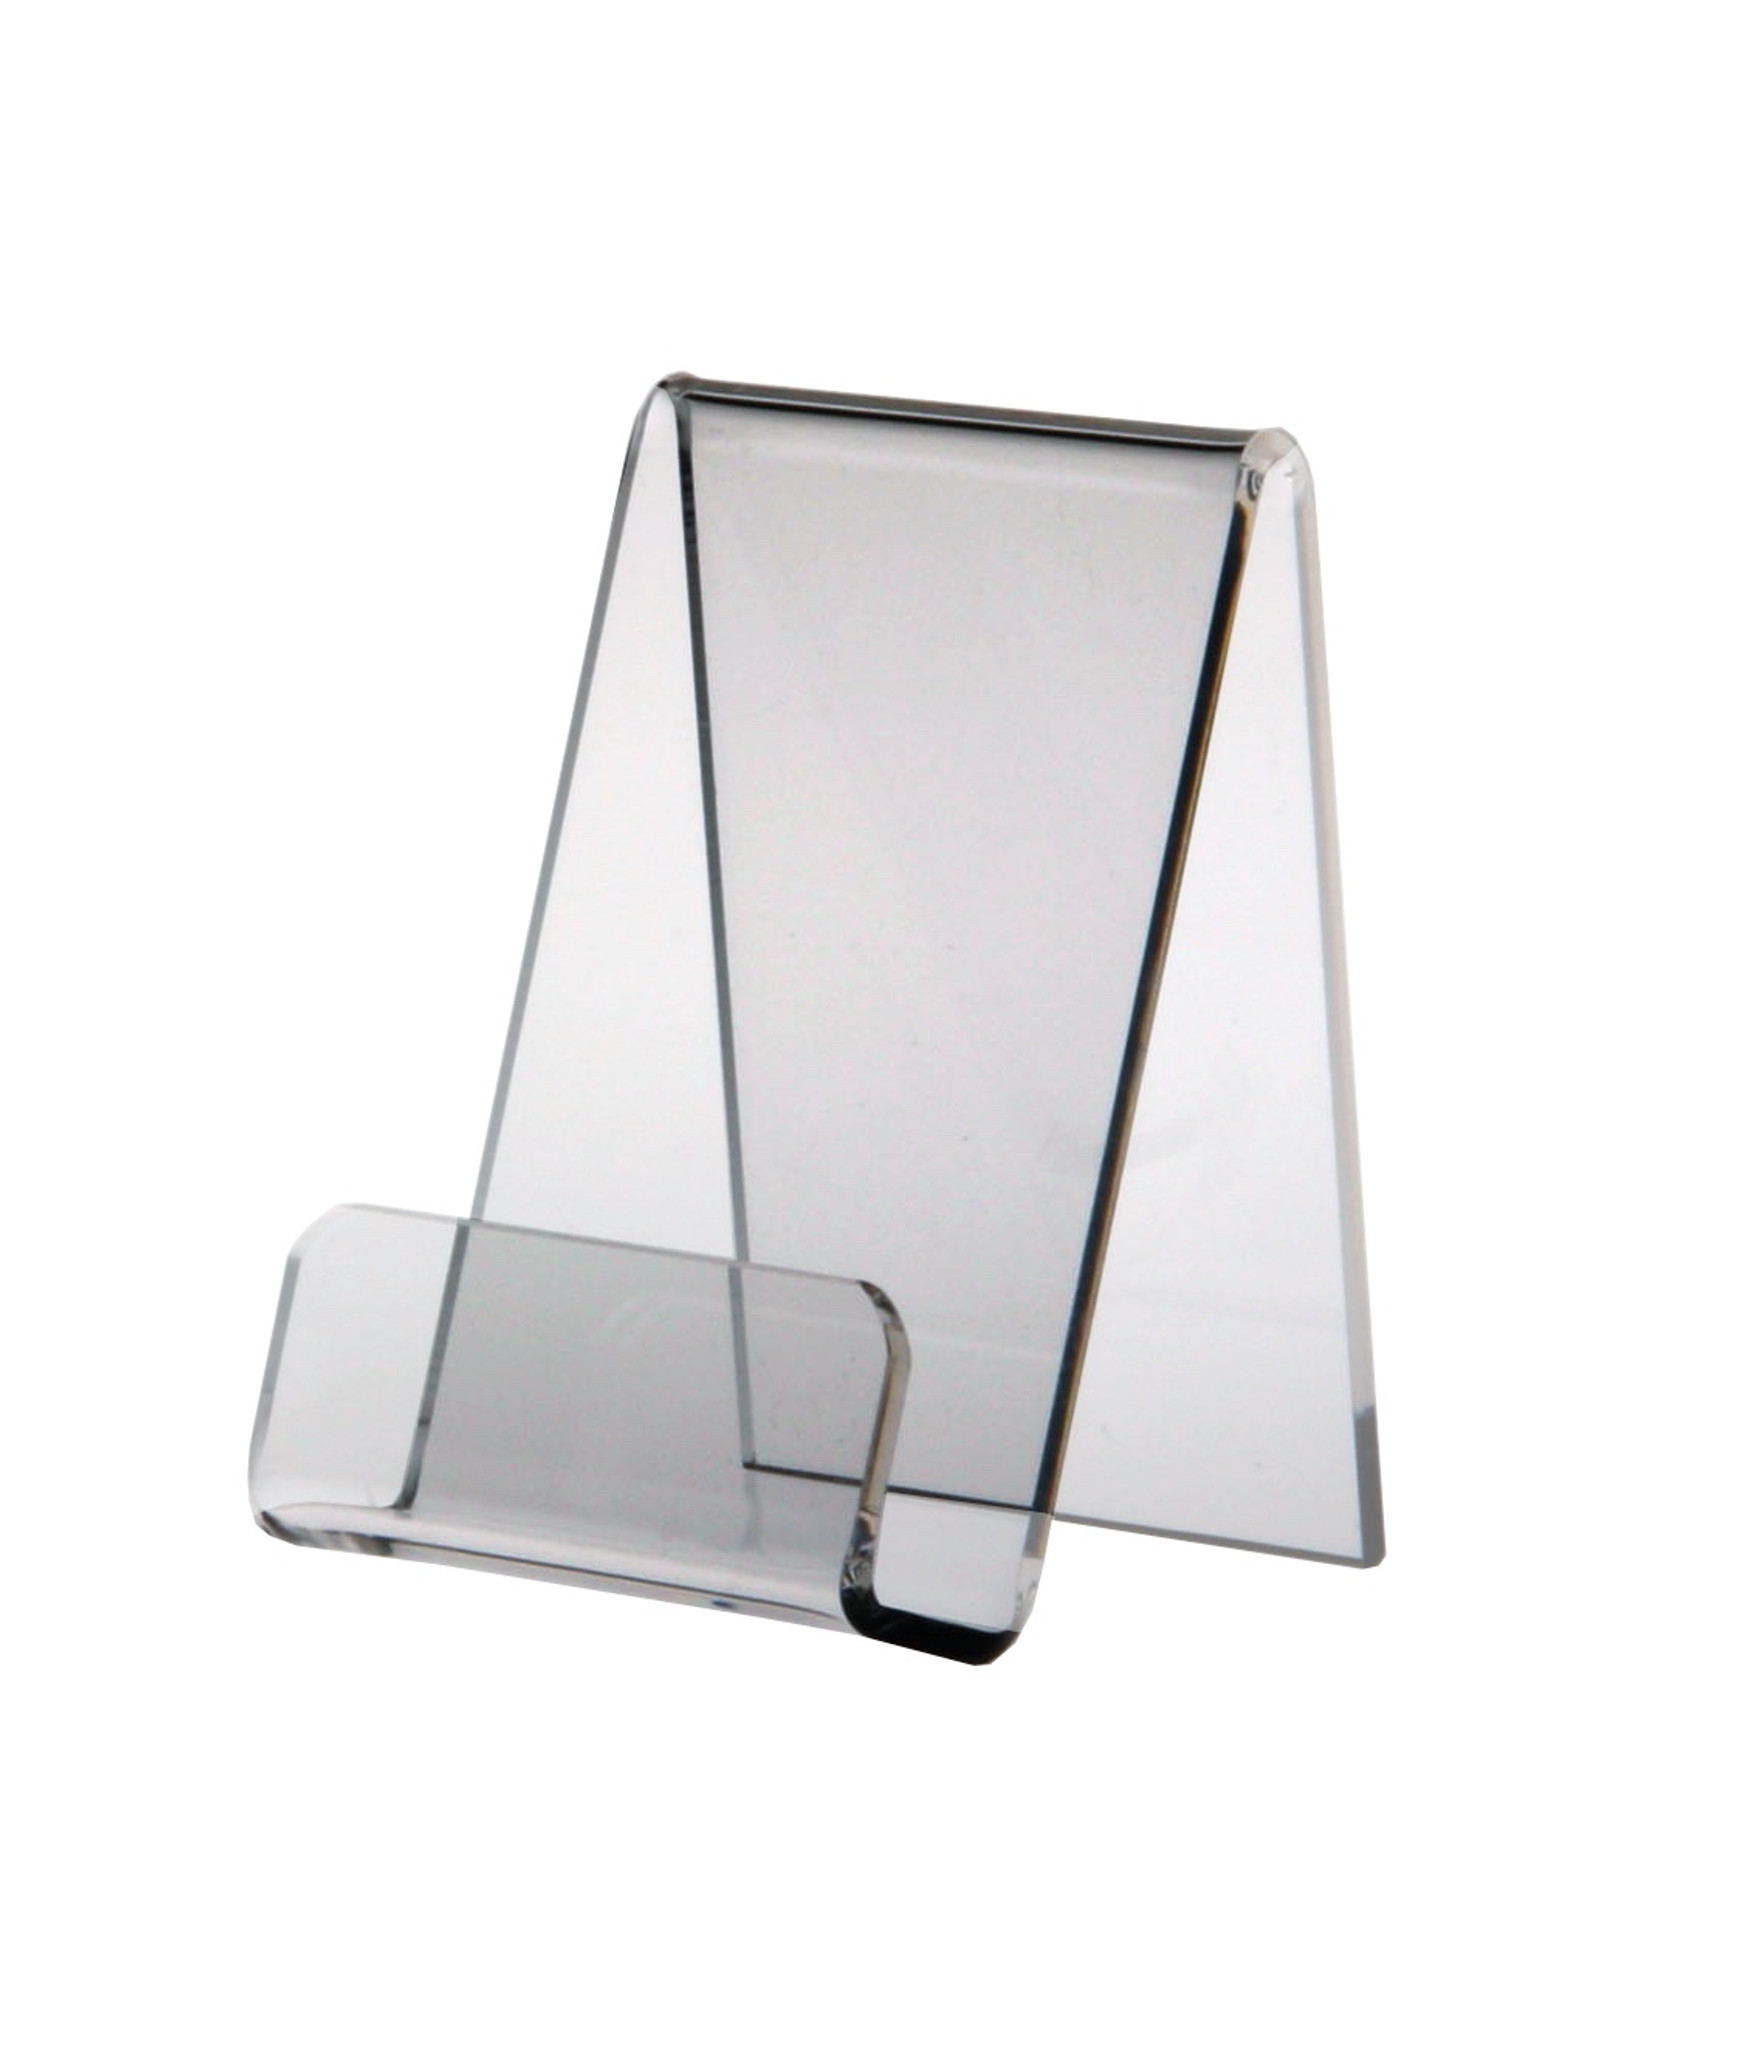 Business Card Size Easel 2-5/8 with Lip (8182) - Clear Solutions® Displays